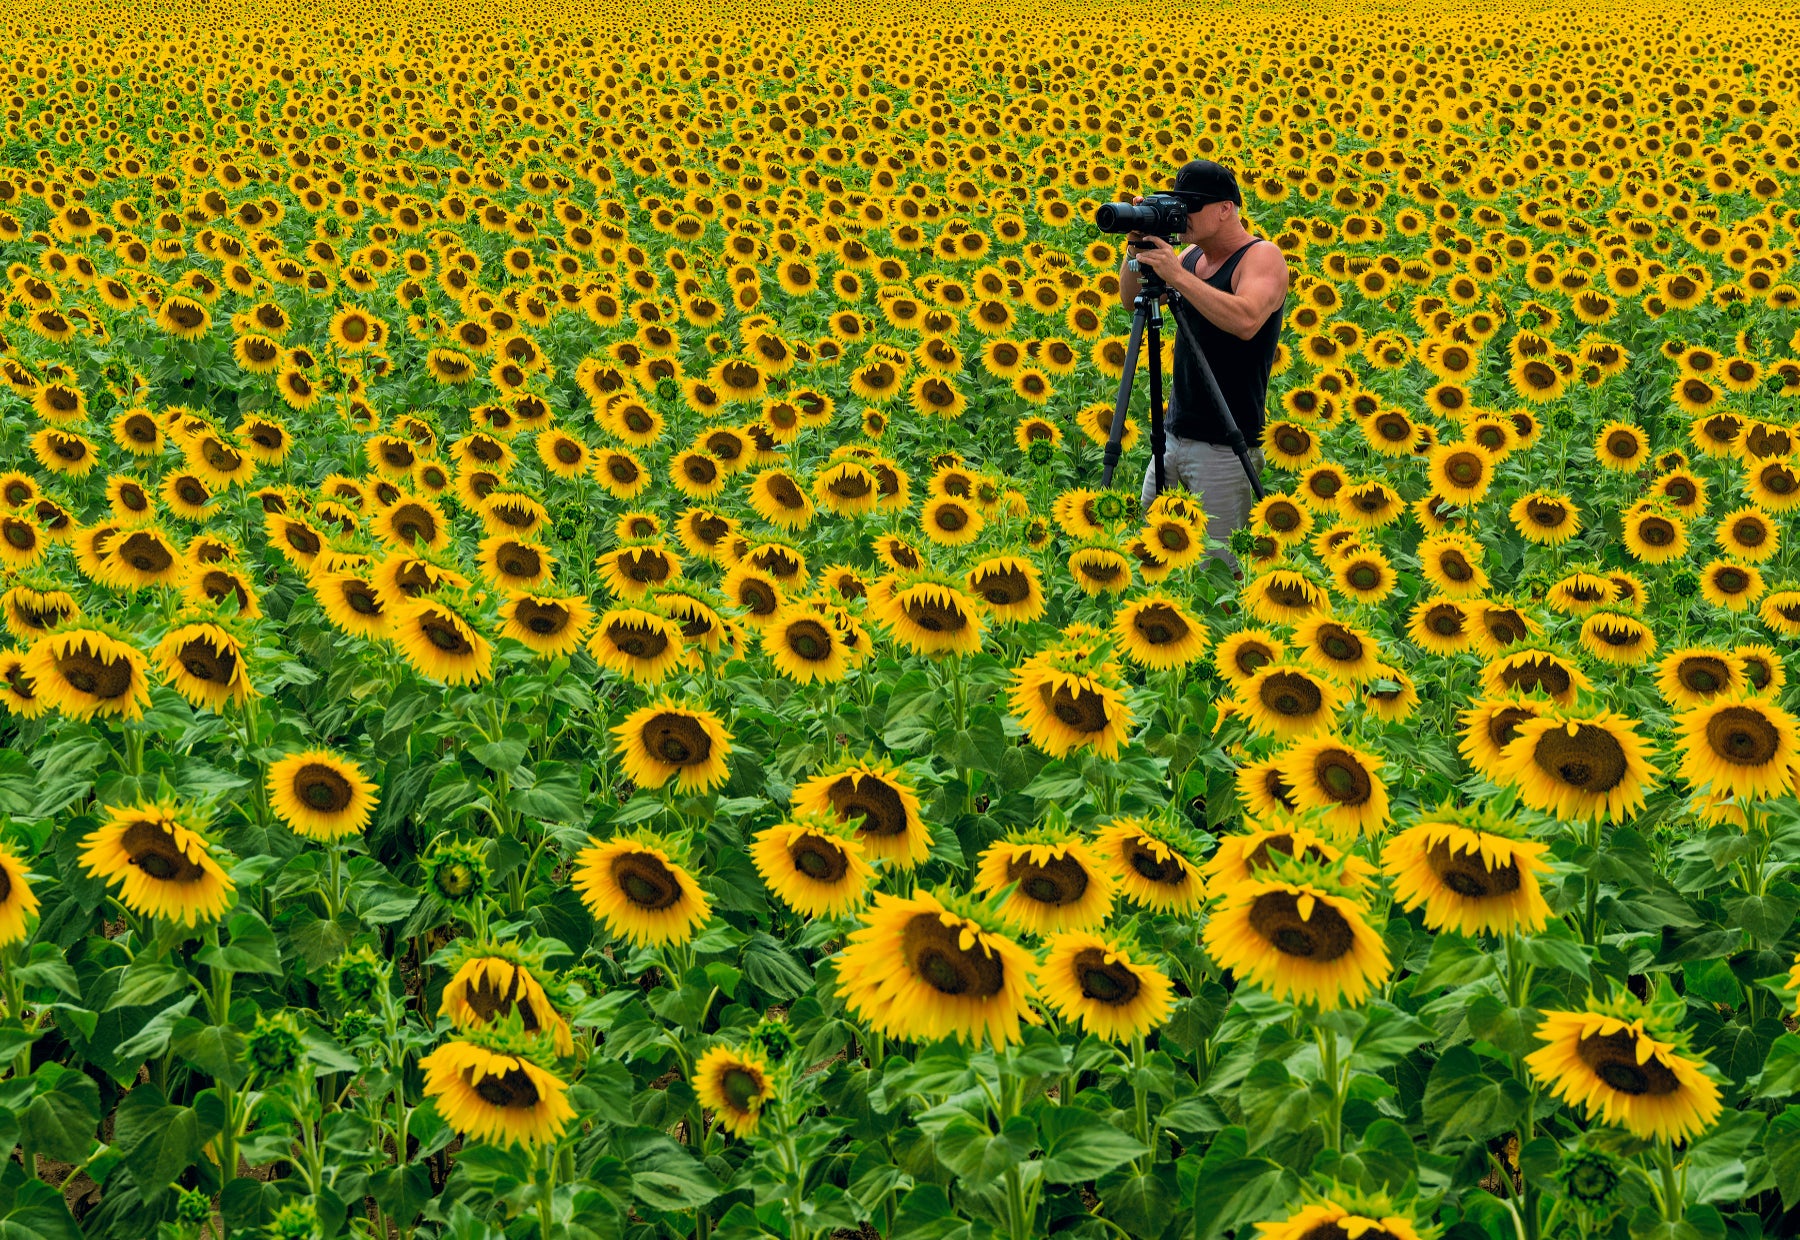 Portrait of Peter Lik wearing a sleeveless shirt and baseball hat, taking a photograph in the sunflower fields of France.